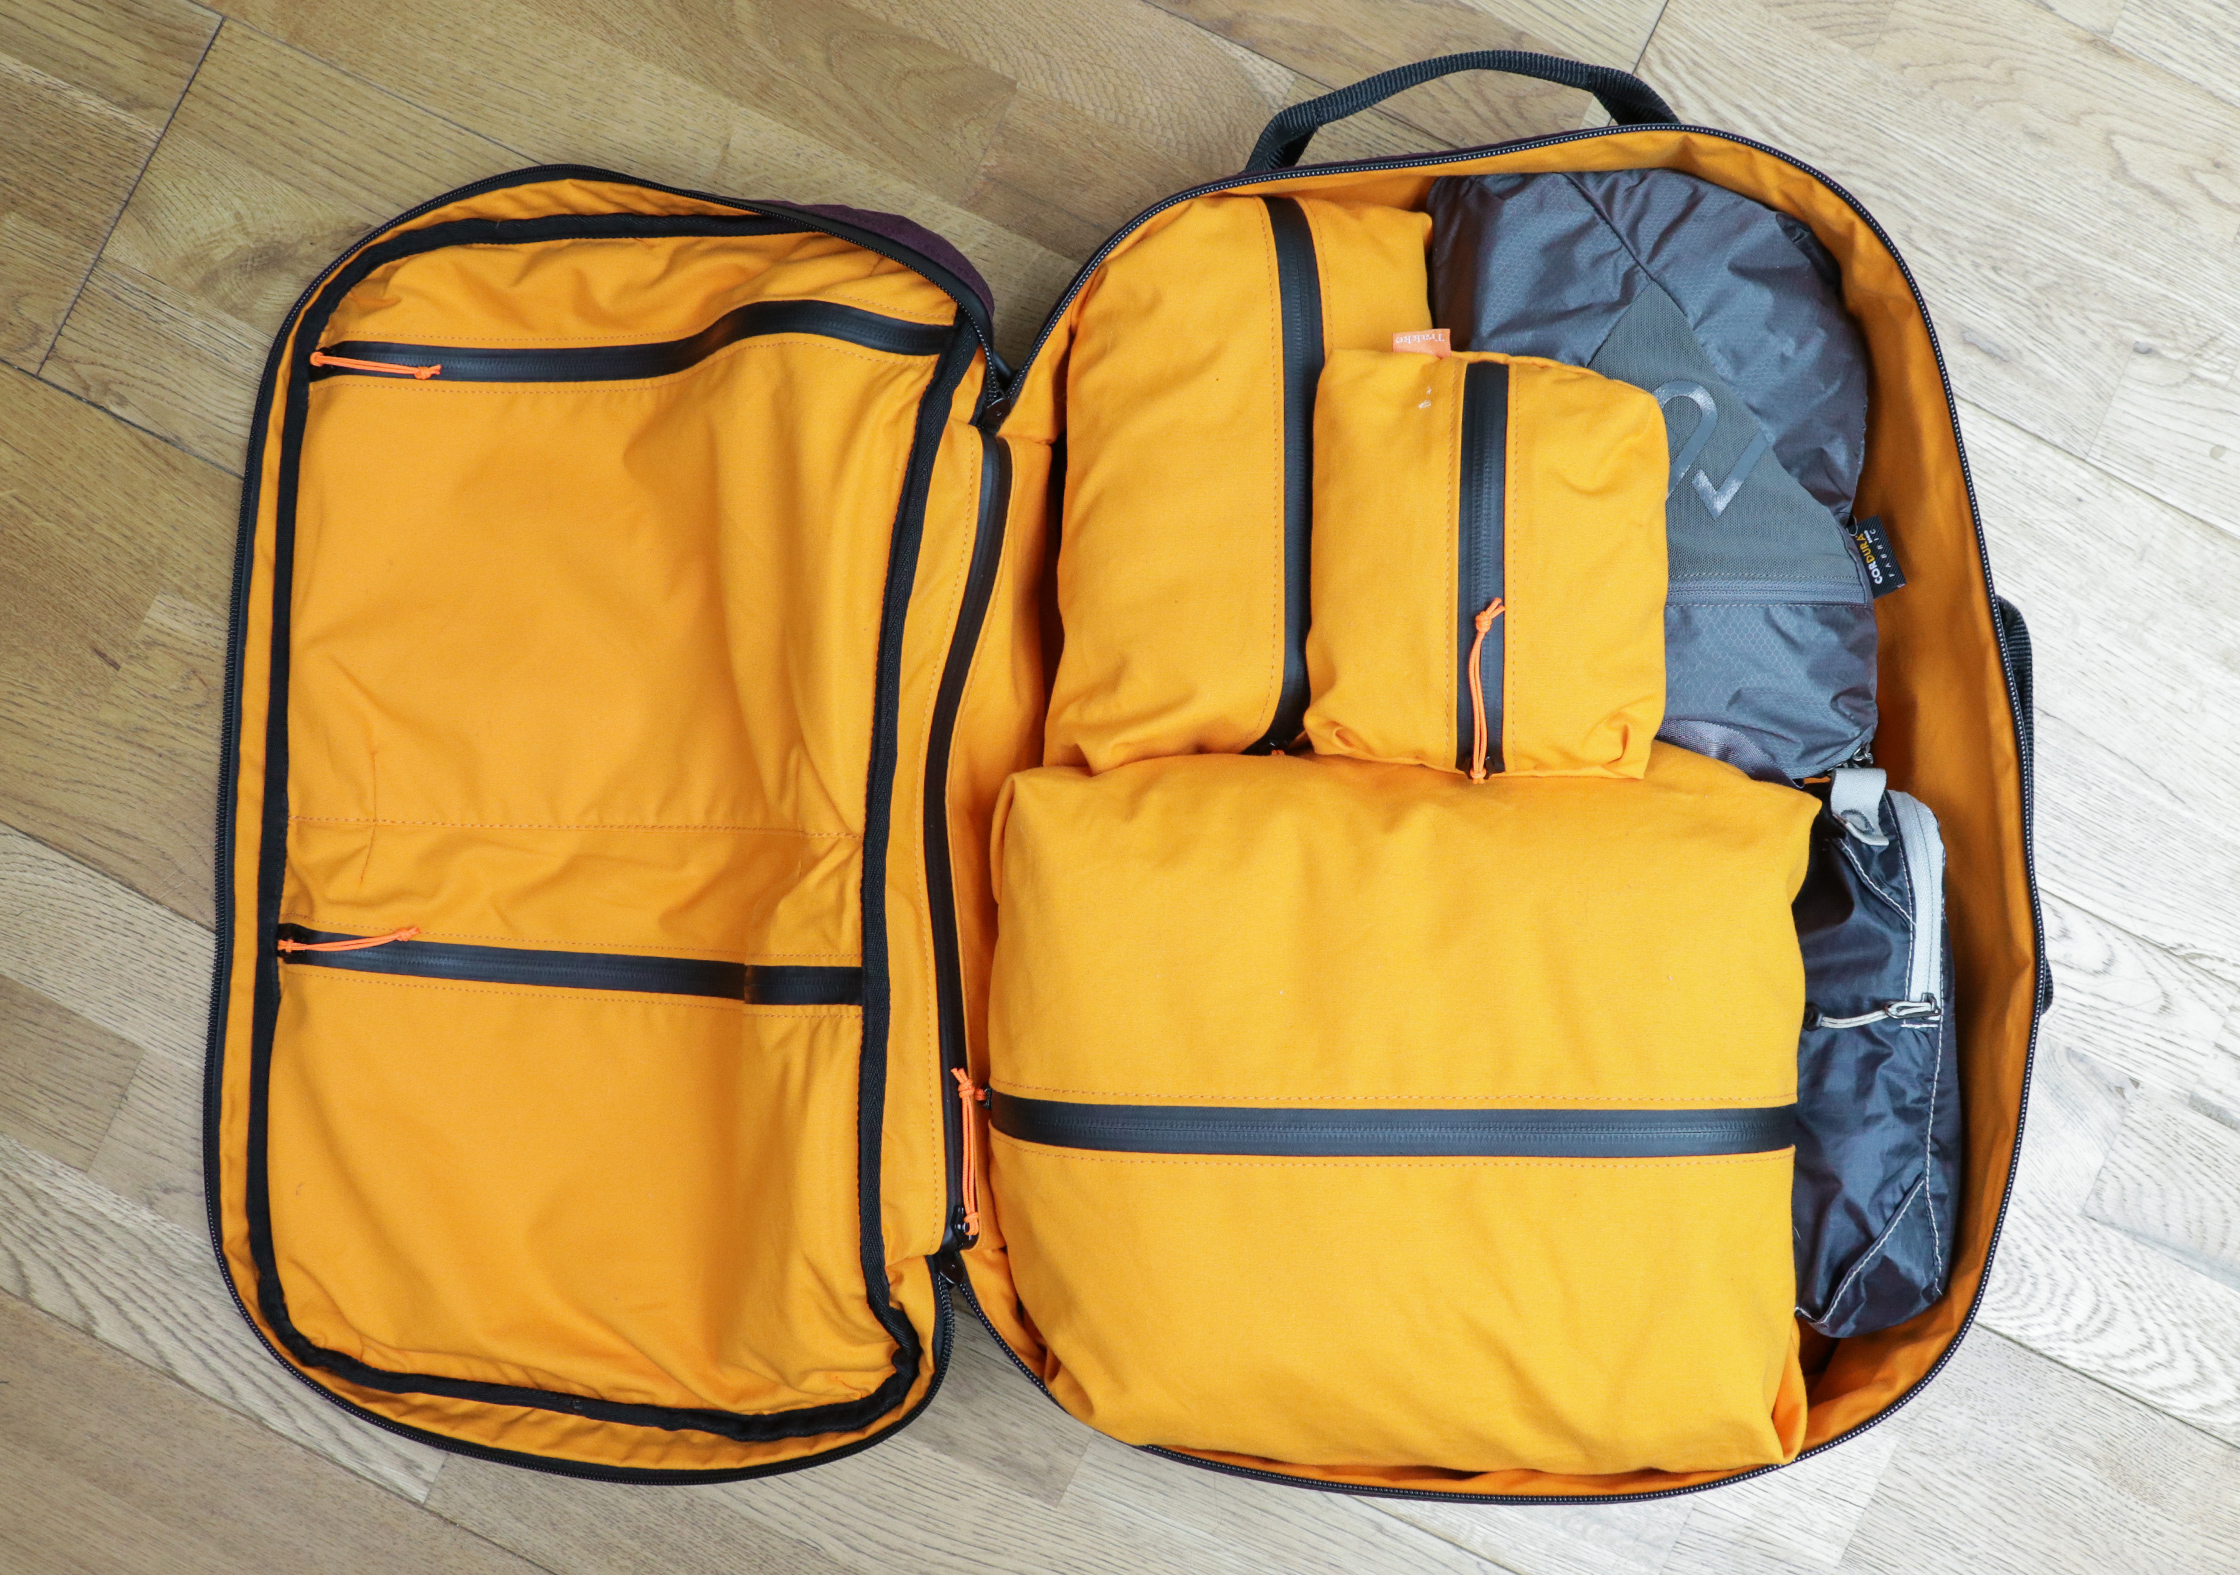 Best packing cubes for backpacking